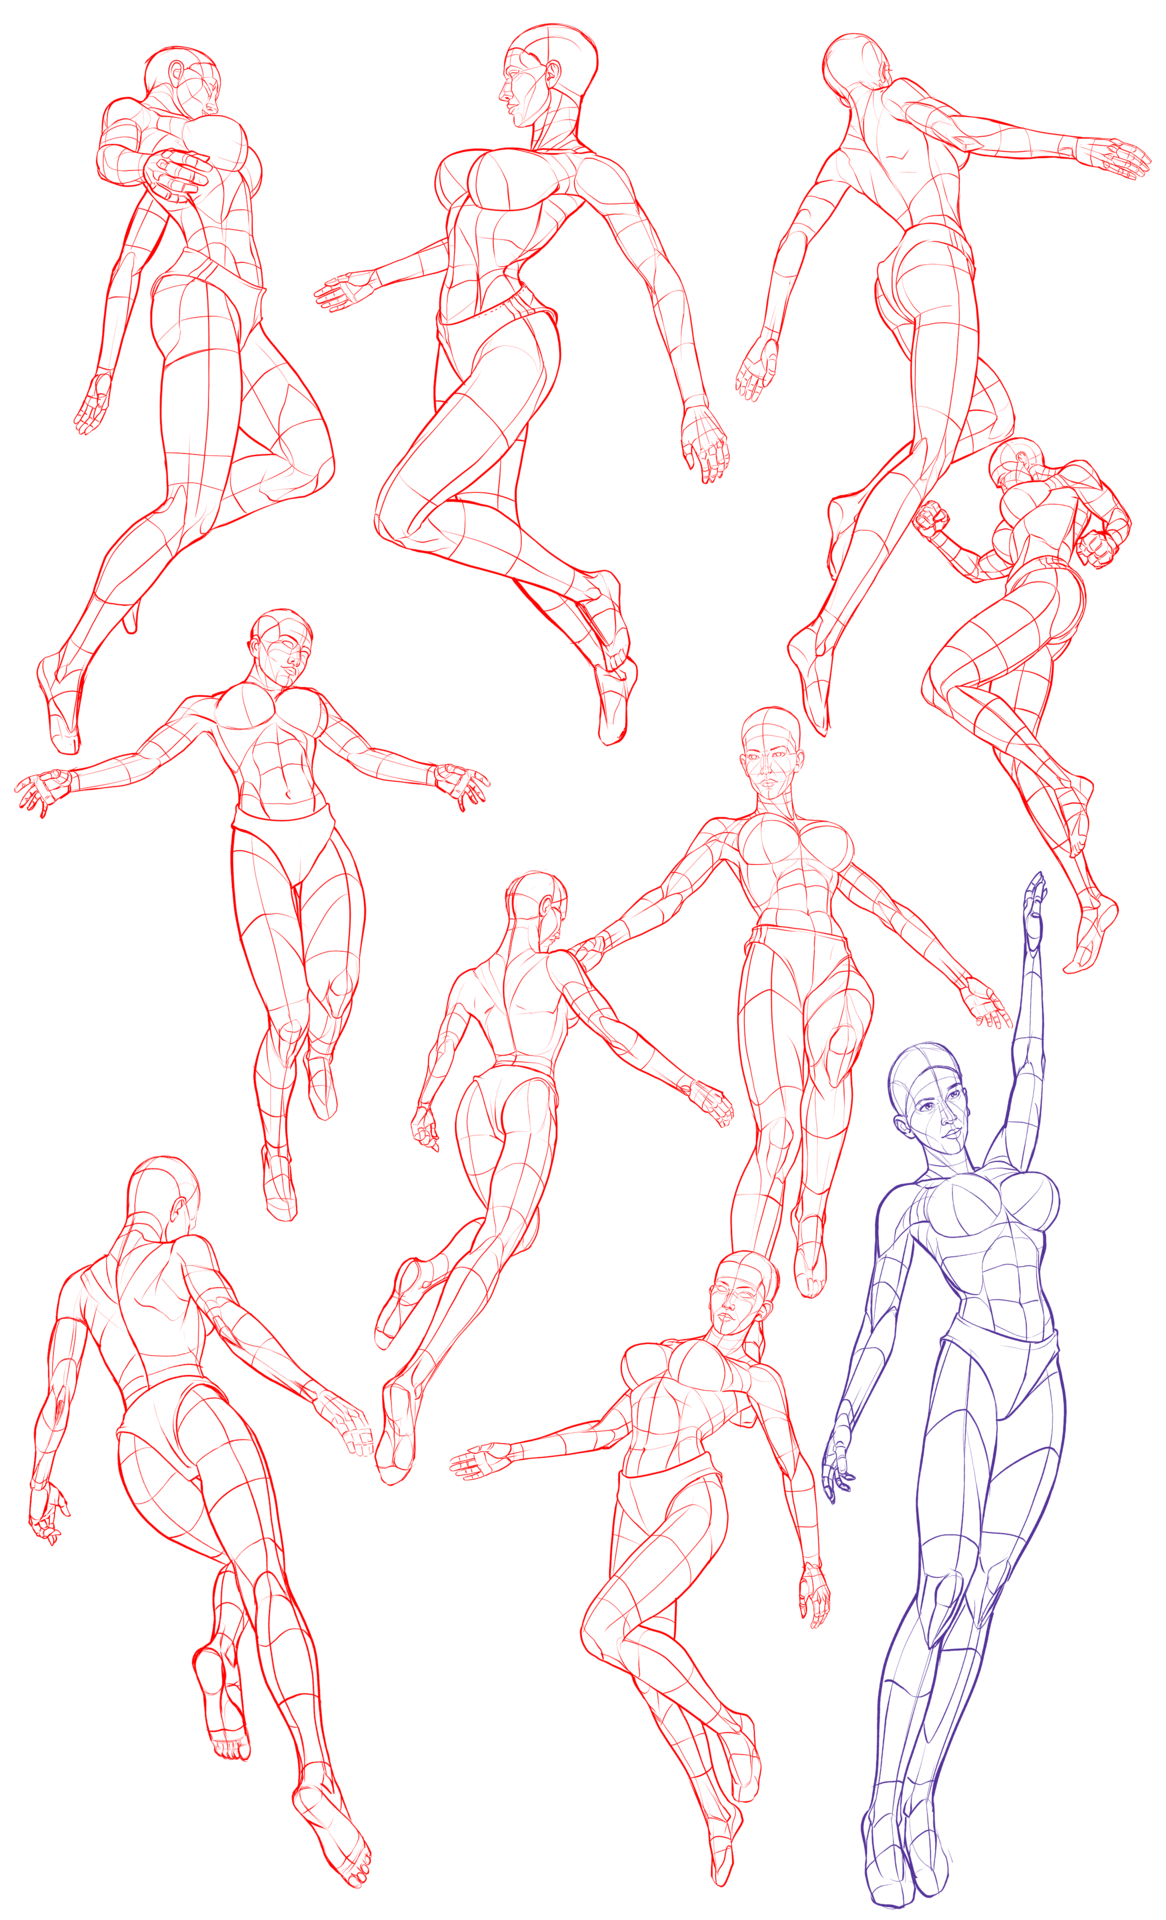 Sketchdump October 2018 [Flying and falling poses] by DamaiMikaz on  DeviantArt